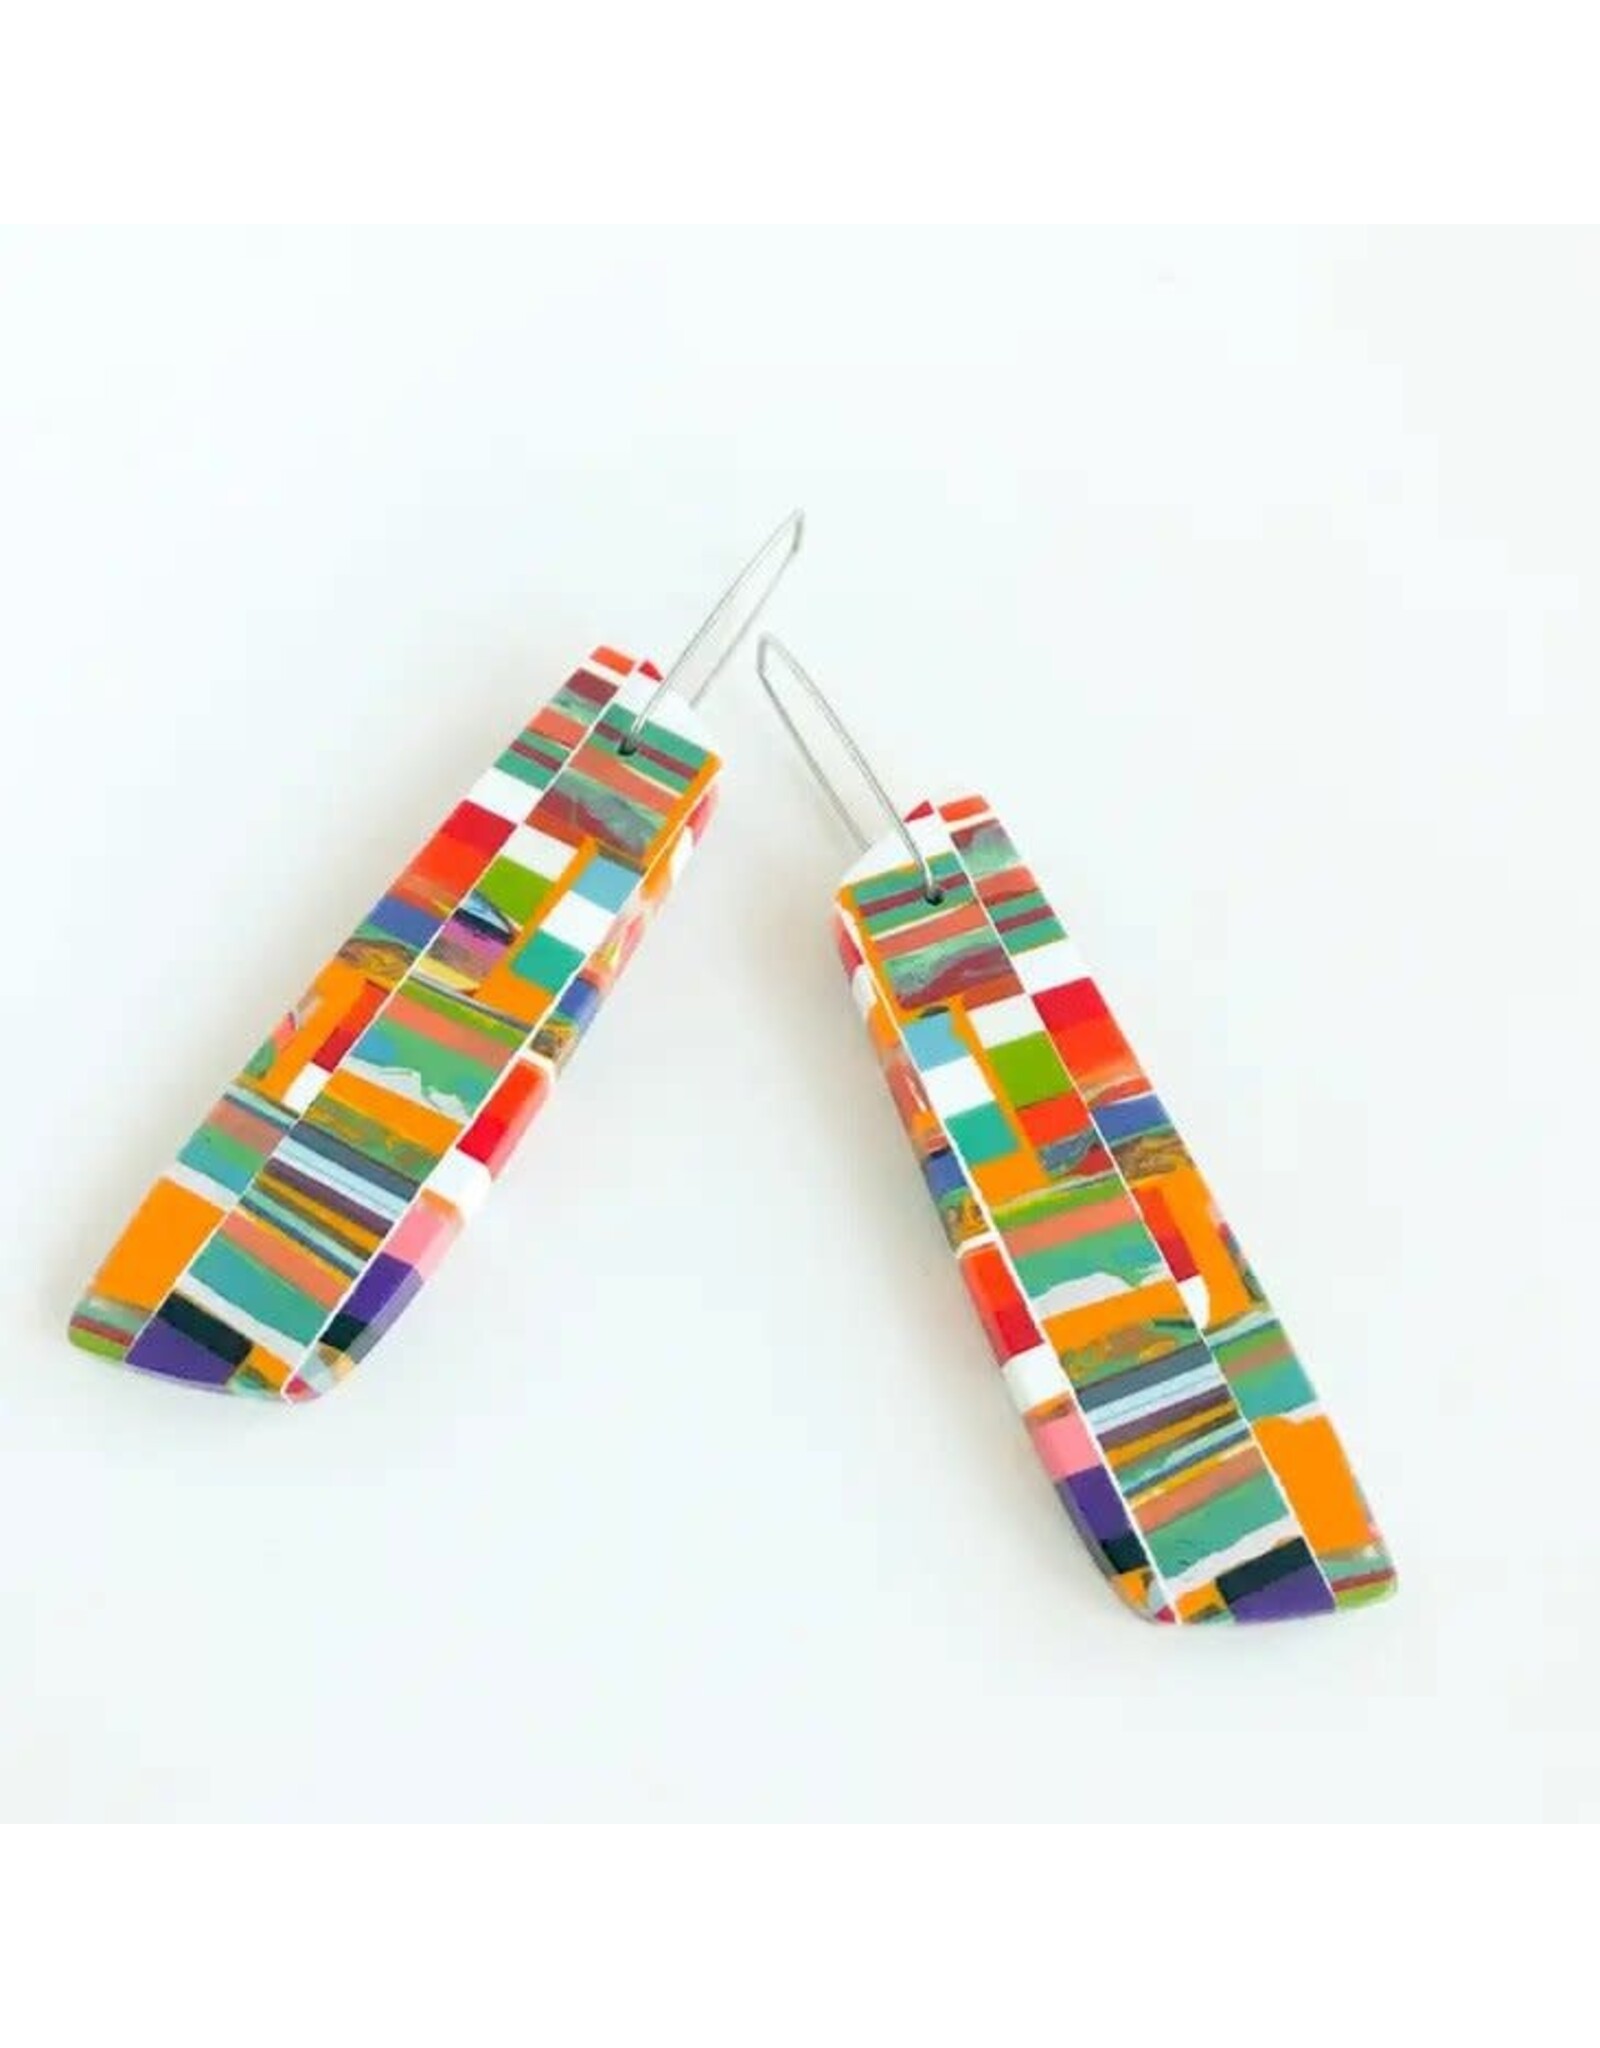 Trade roots Poly Resin Long Rectangle Mosaic Earrings - Large Multi-Bright, Colombia